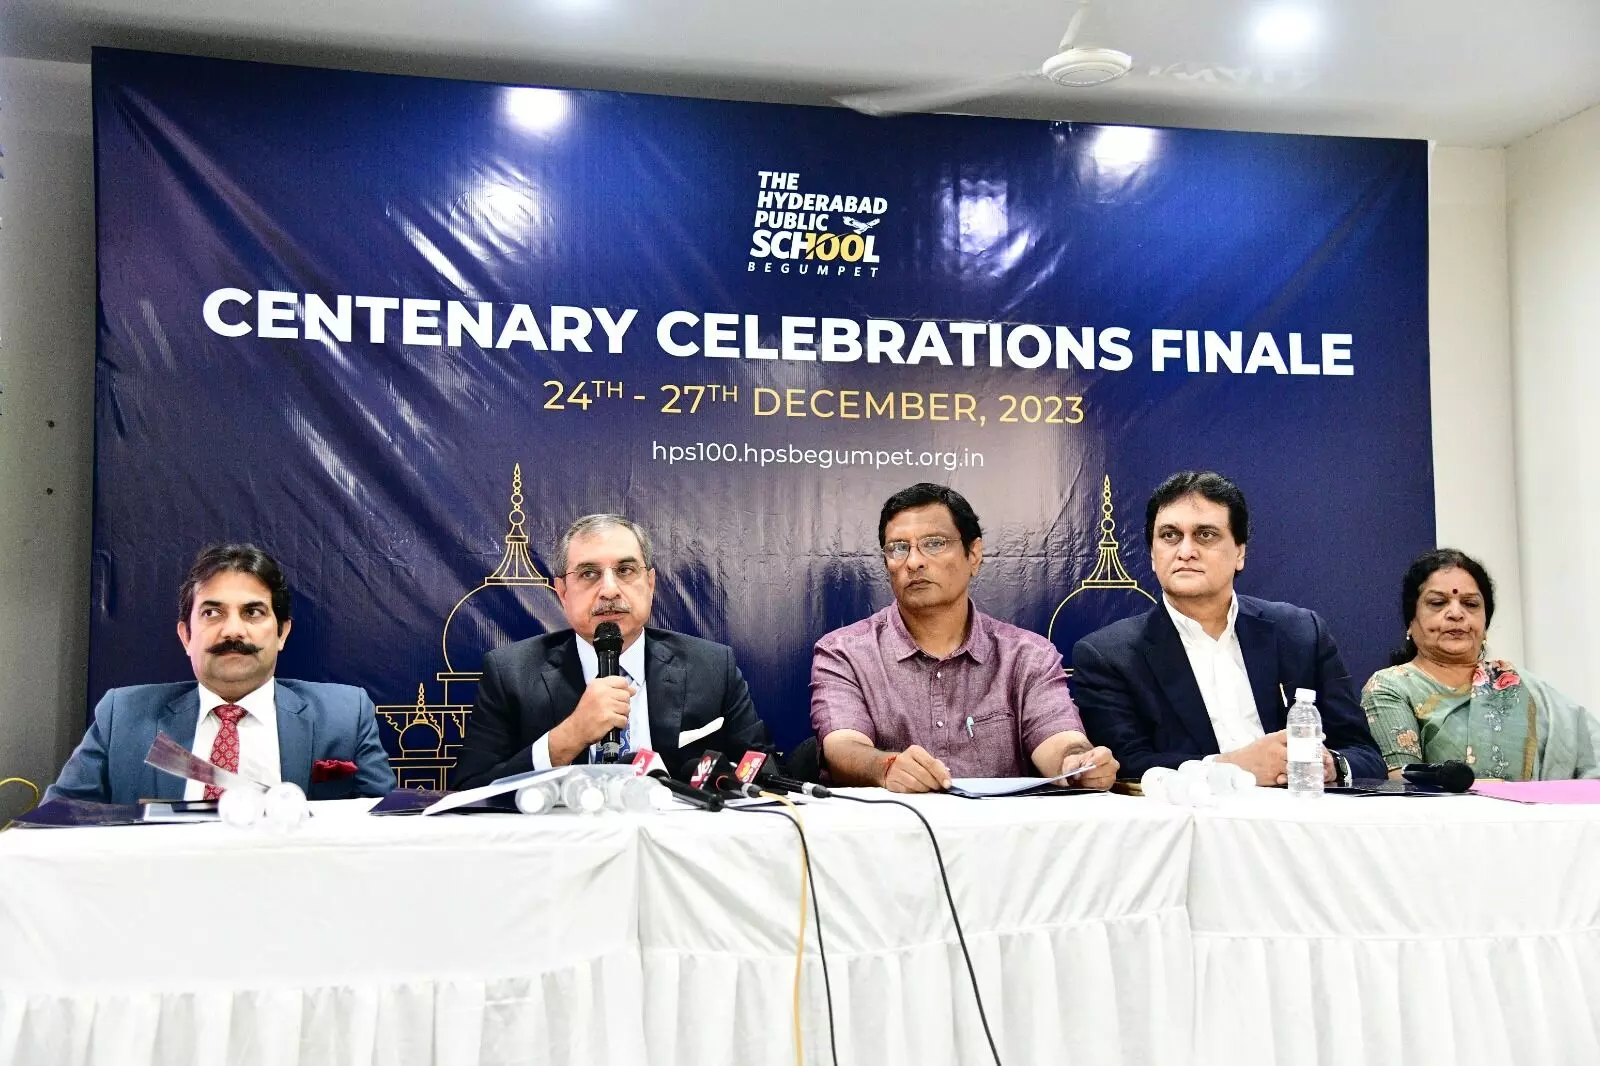 Centenary fete: HPS to host largest fundraiser in history of schools in India